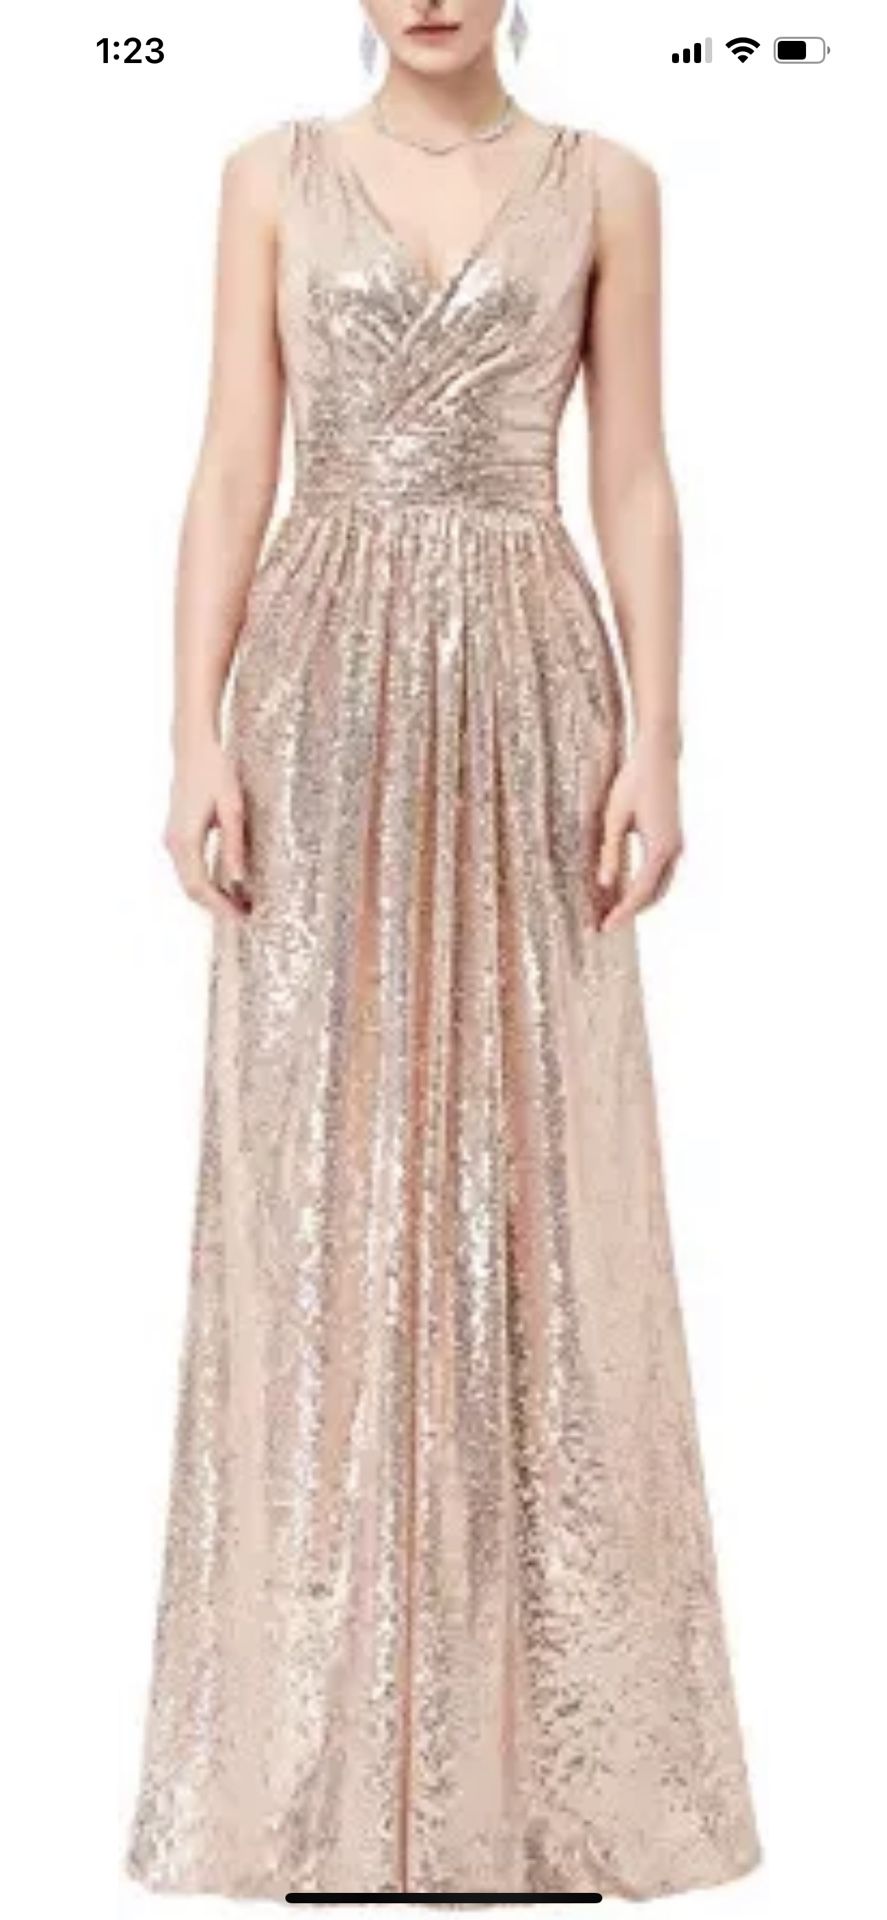 New Sequin Rose Gold Party Prom Dress Size M Or 6 Or 8